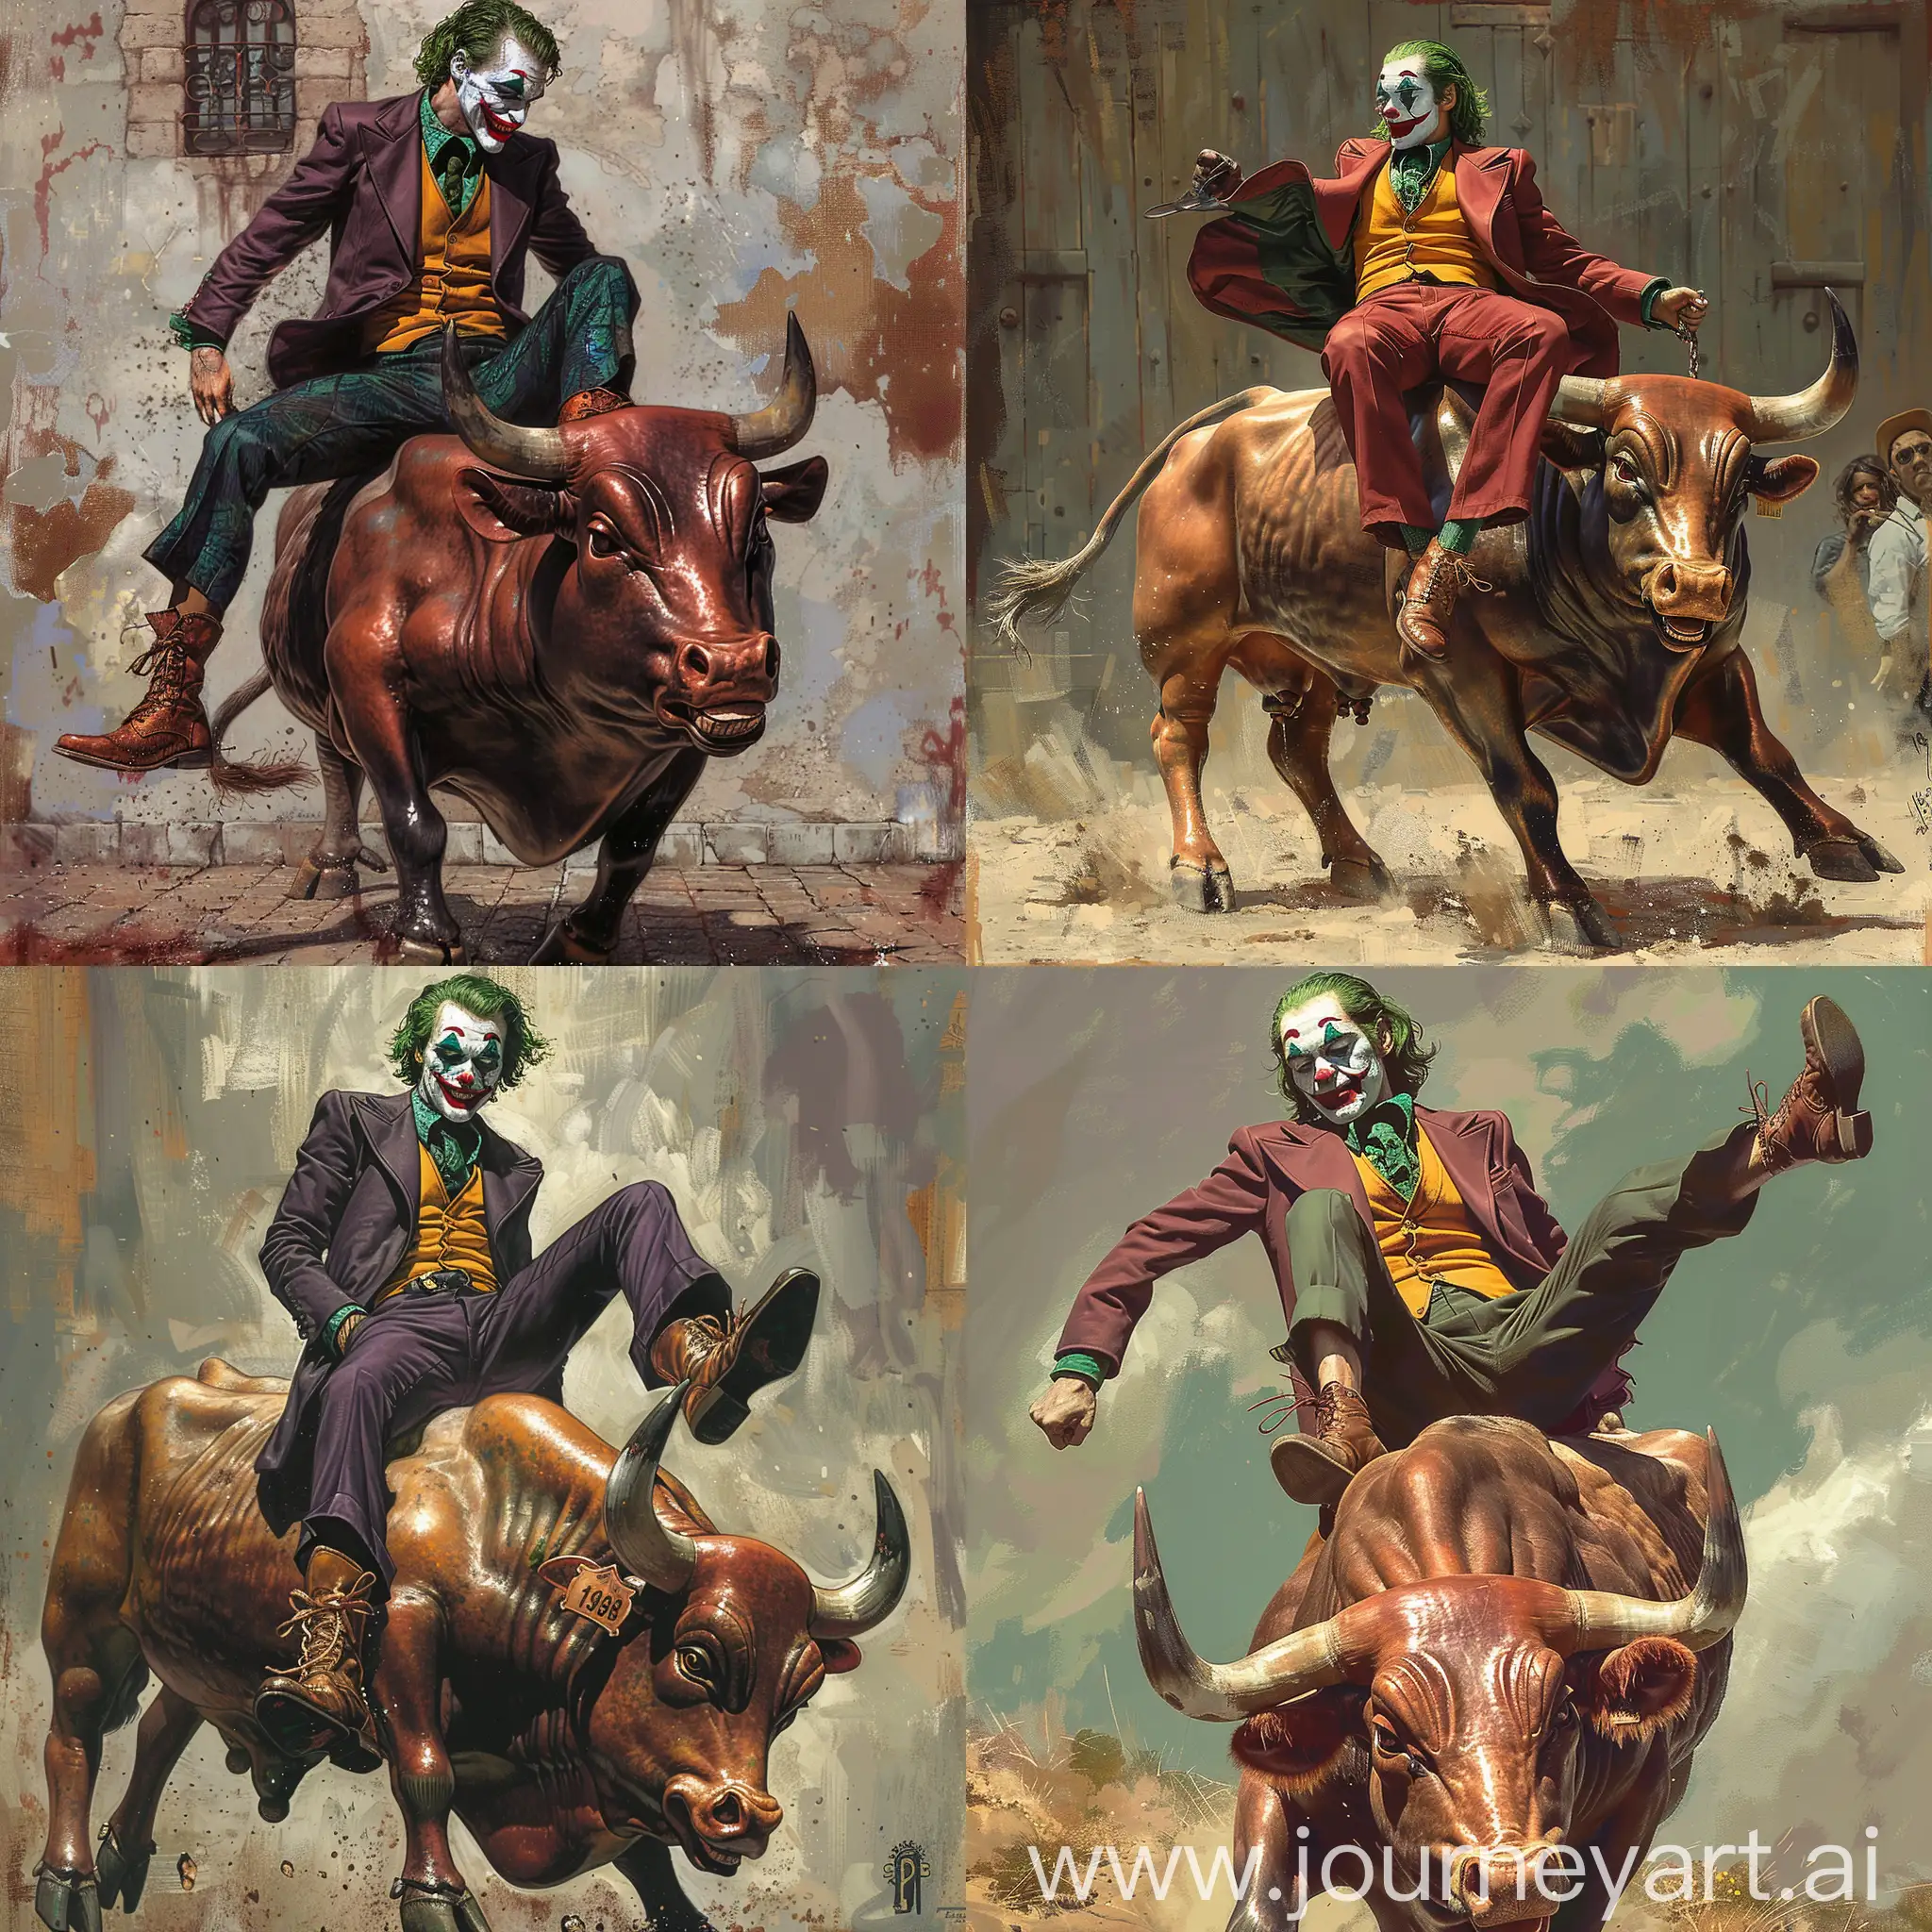 Joker-1488-Riding-a-Copper-Bull-in-Spanish-Boots